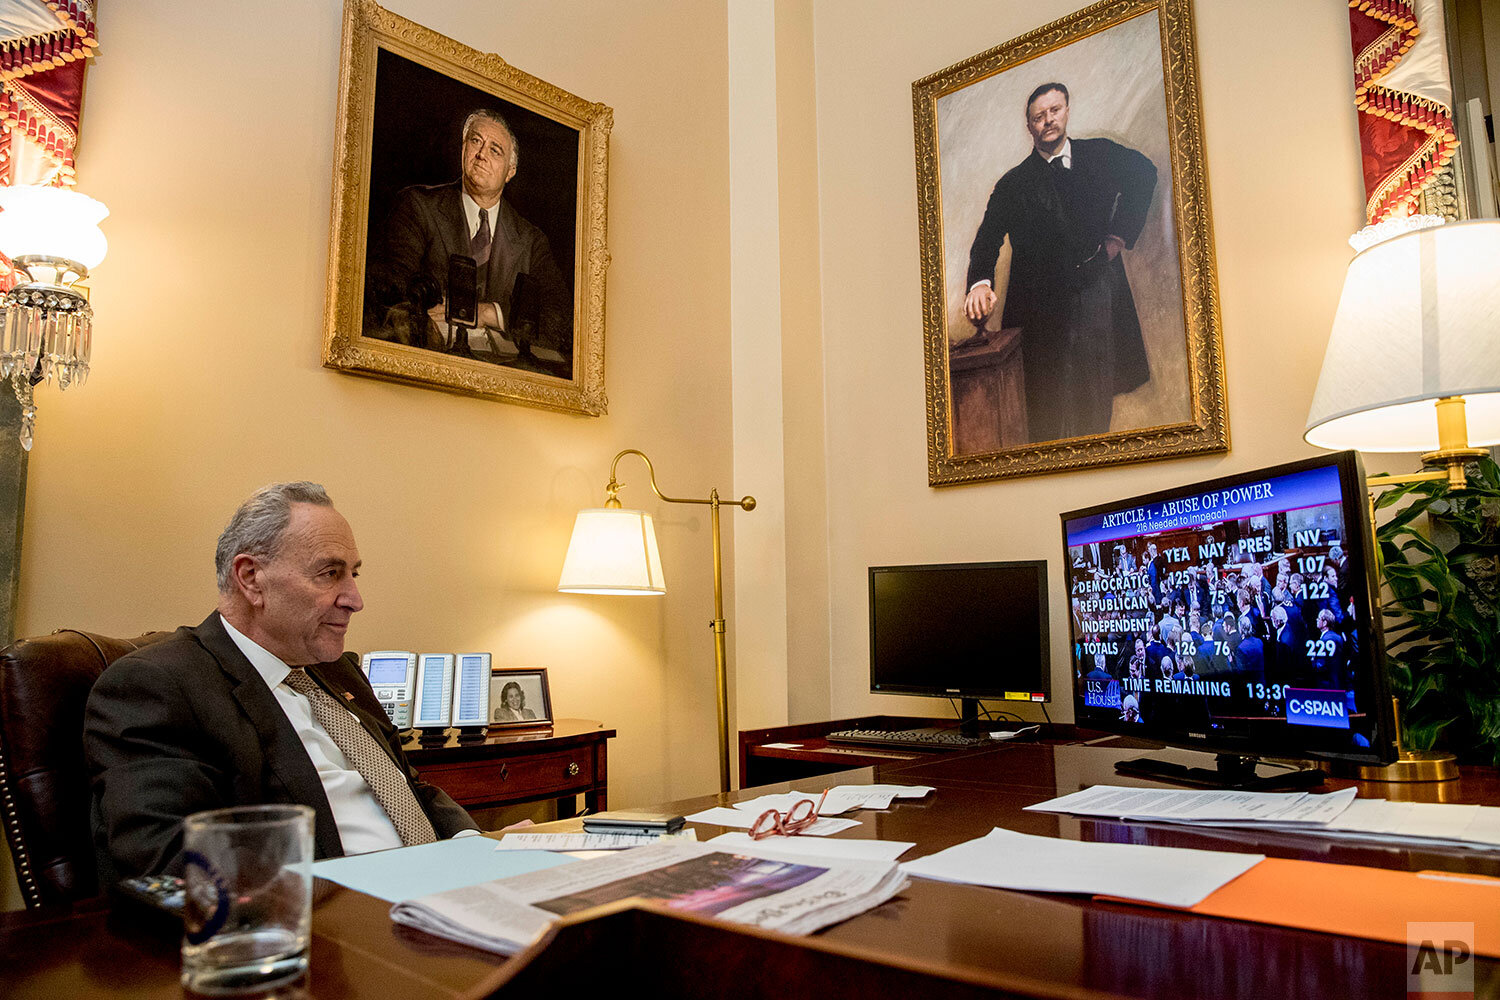  Senate Minority Leader Sen. Chuck Schumer of N.Y., watches from his Senate office as the House votes on the articles of impeachment President Donald Trump, Wednesday, Dec. 18, 2019, on Capitol Hill in Washington. (AP Photo/Andrew Harnik) 